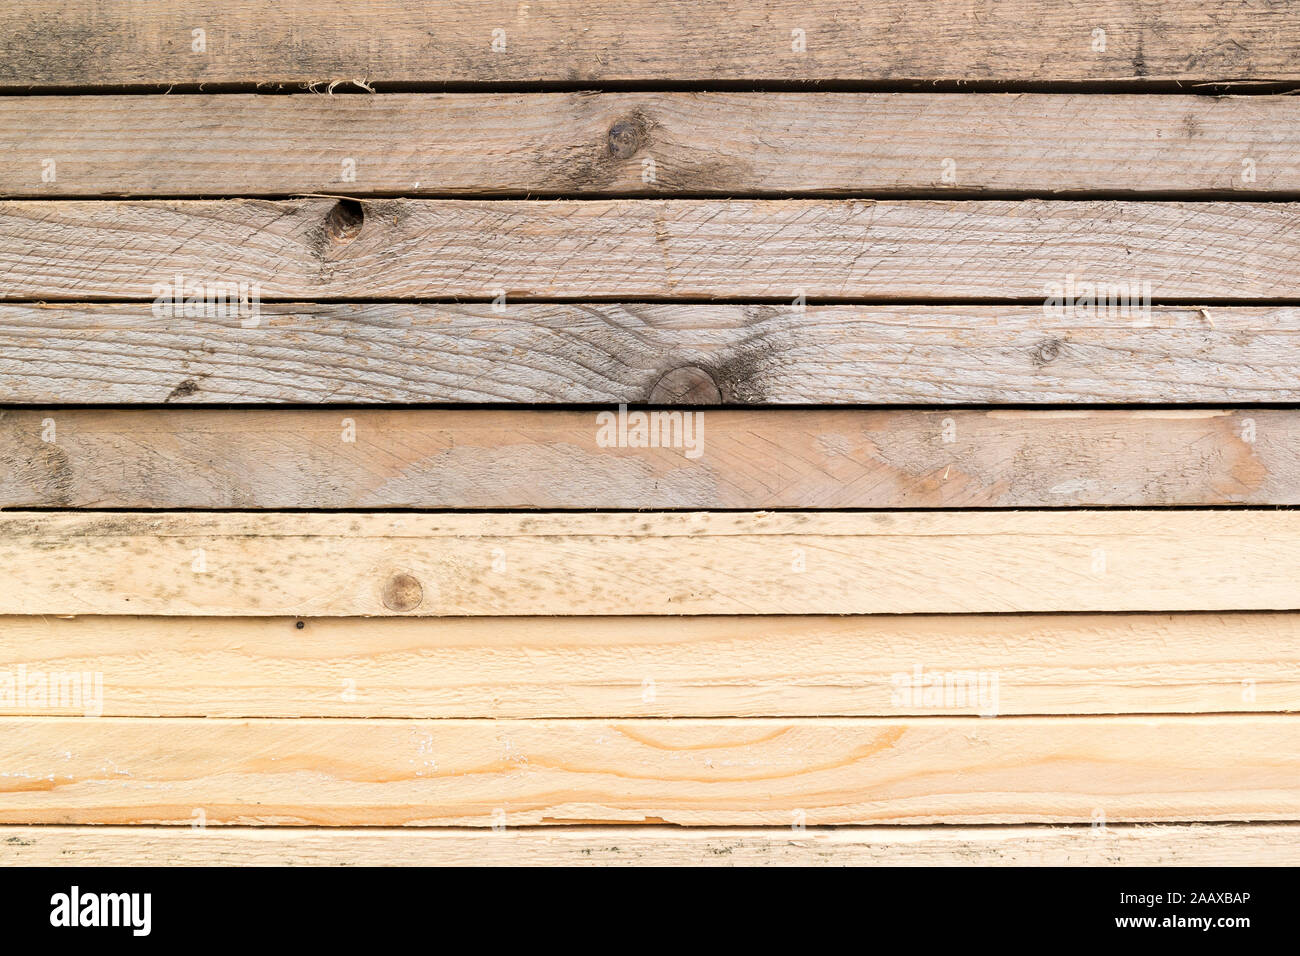 Close-up of stacked wooden boards for building a house Stock Photo